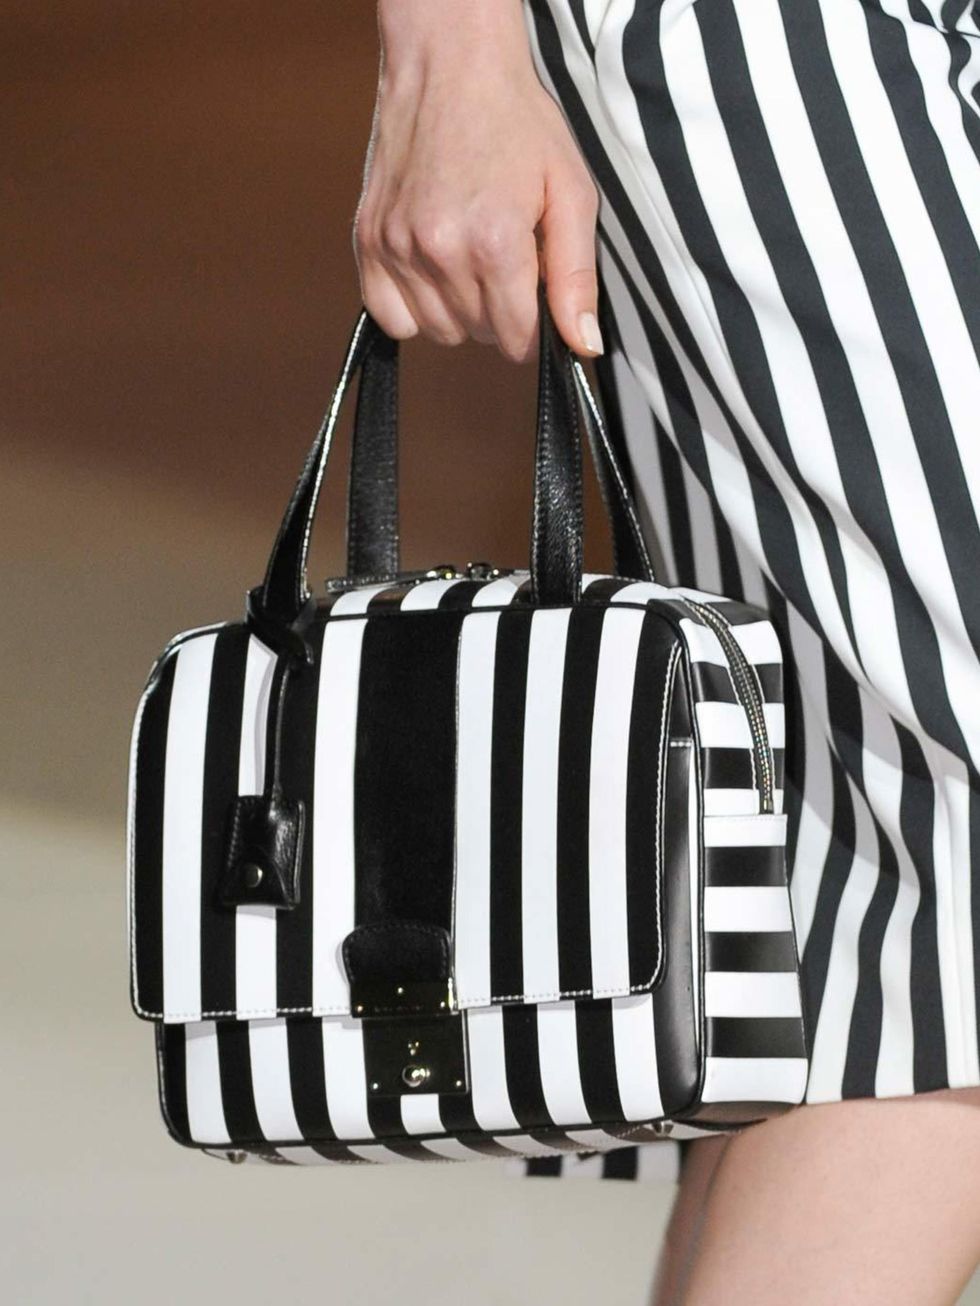 <p><a href="http://www.elleuk.com/catwalk/designer-a-z/marc-jacobs/spring-summer-2013">Marc Jacobs</a> emulates the monochromed stripe for his spring/summer 2013 collection </p>